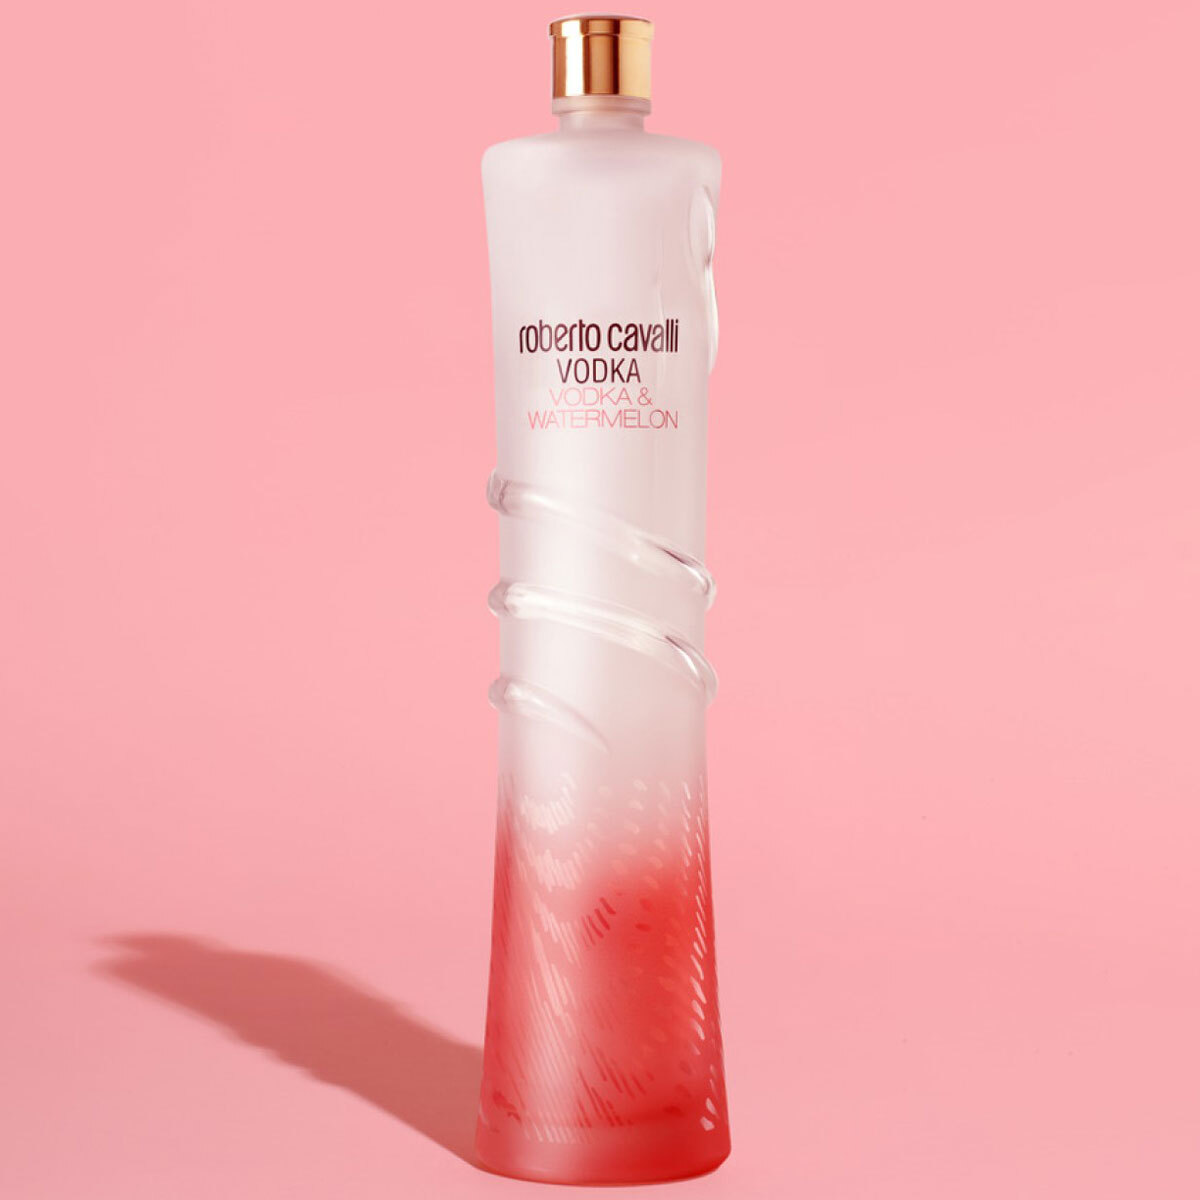 Lifestyle image of bottle in front of pink backgorund